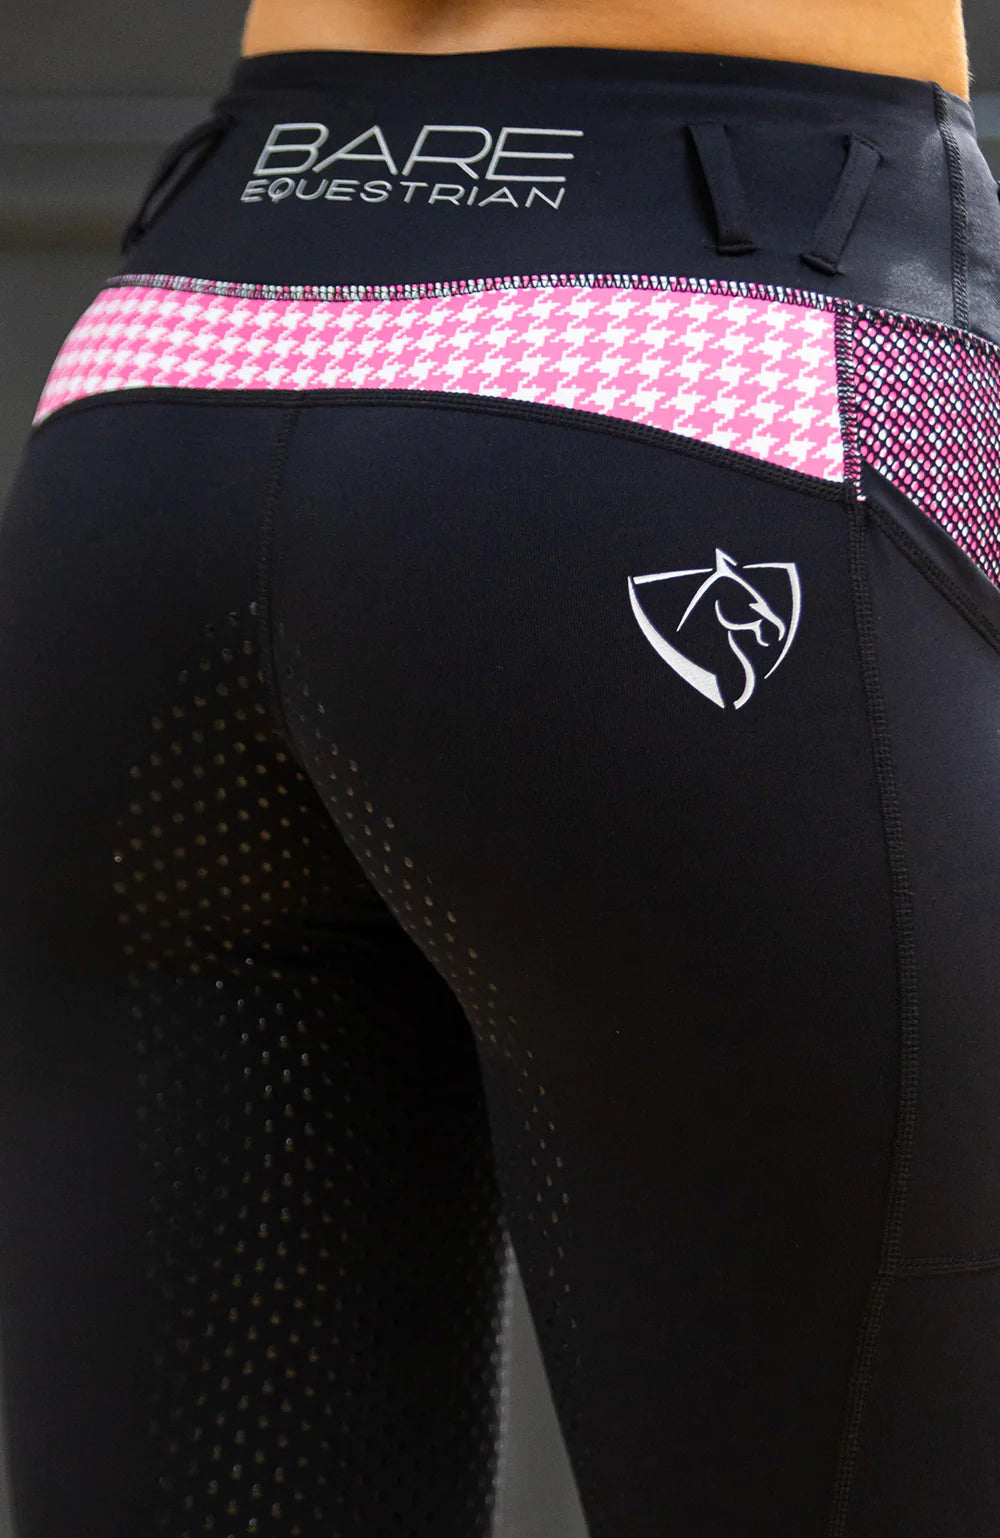 BARE Performance Riding Tights - Black with Pink Houndstooth